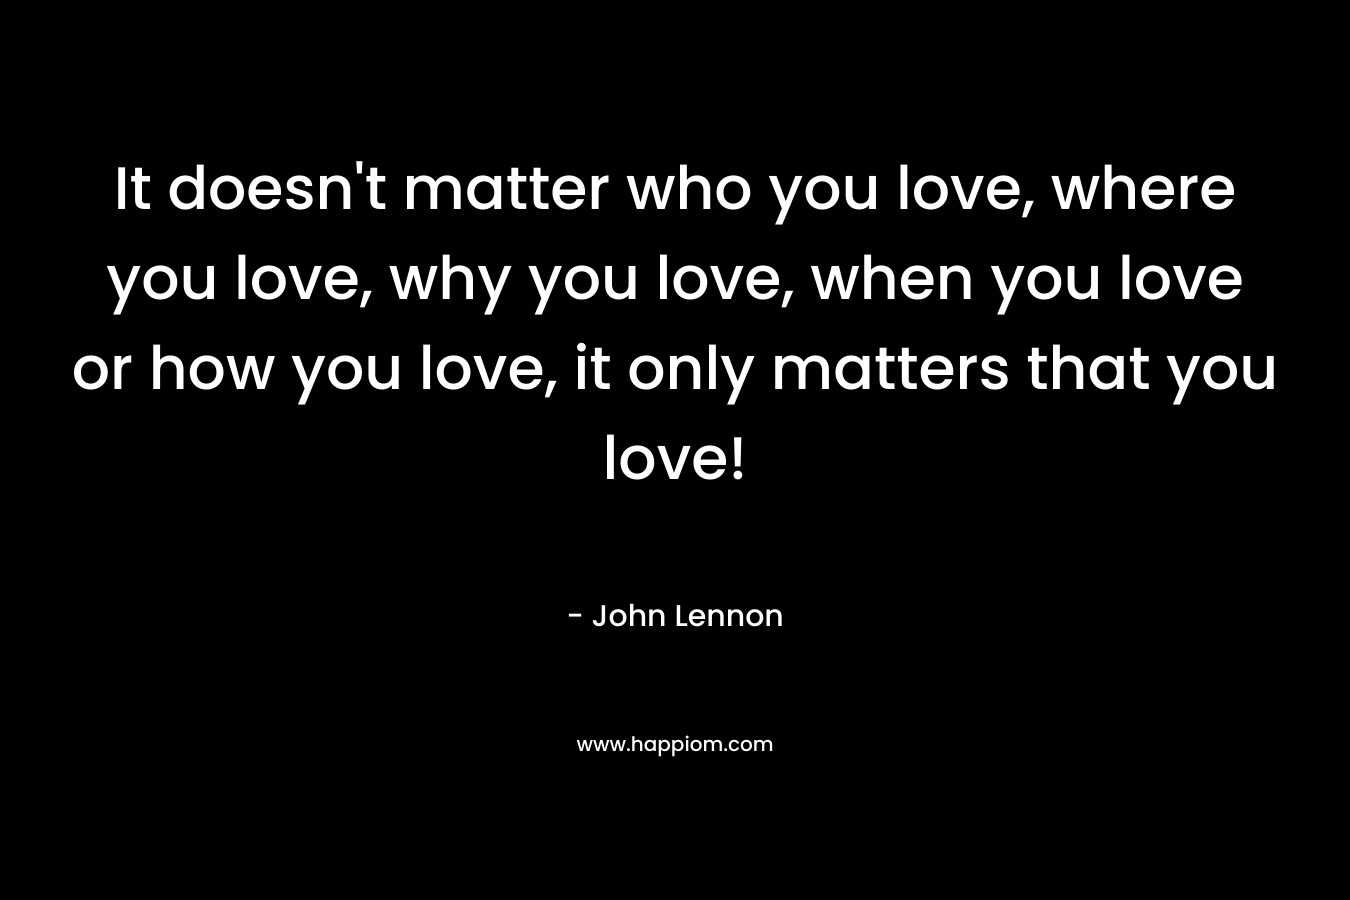 It doesn't matter who you love, where you love, why you love, when you love or how you love, it only matters that you love!